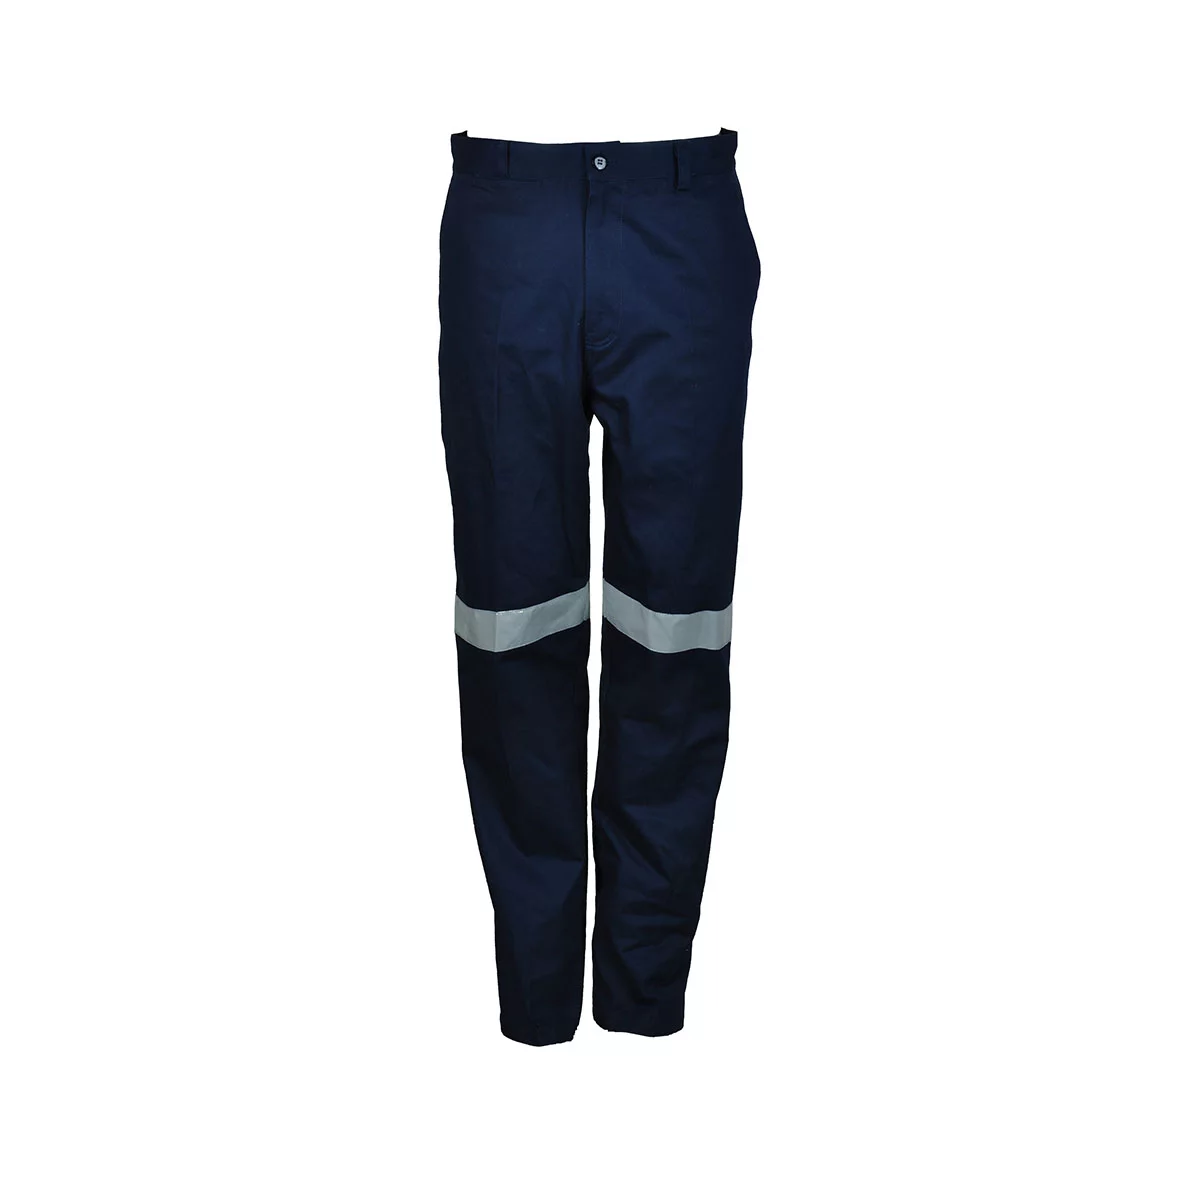 Drill Work Pants with Tape | Navy | Unisex Work Pants